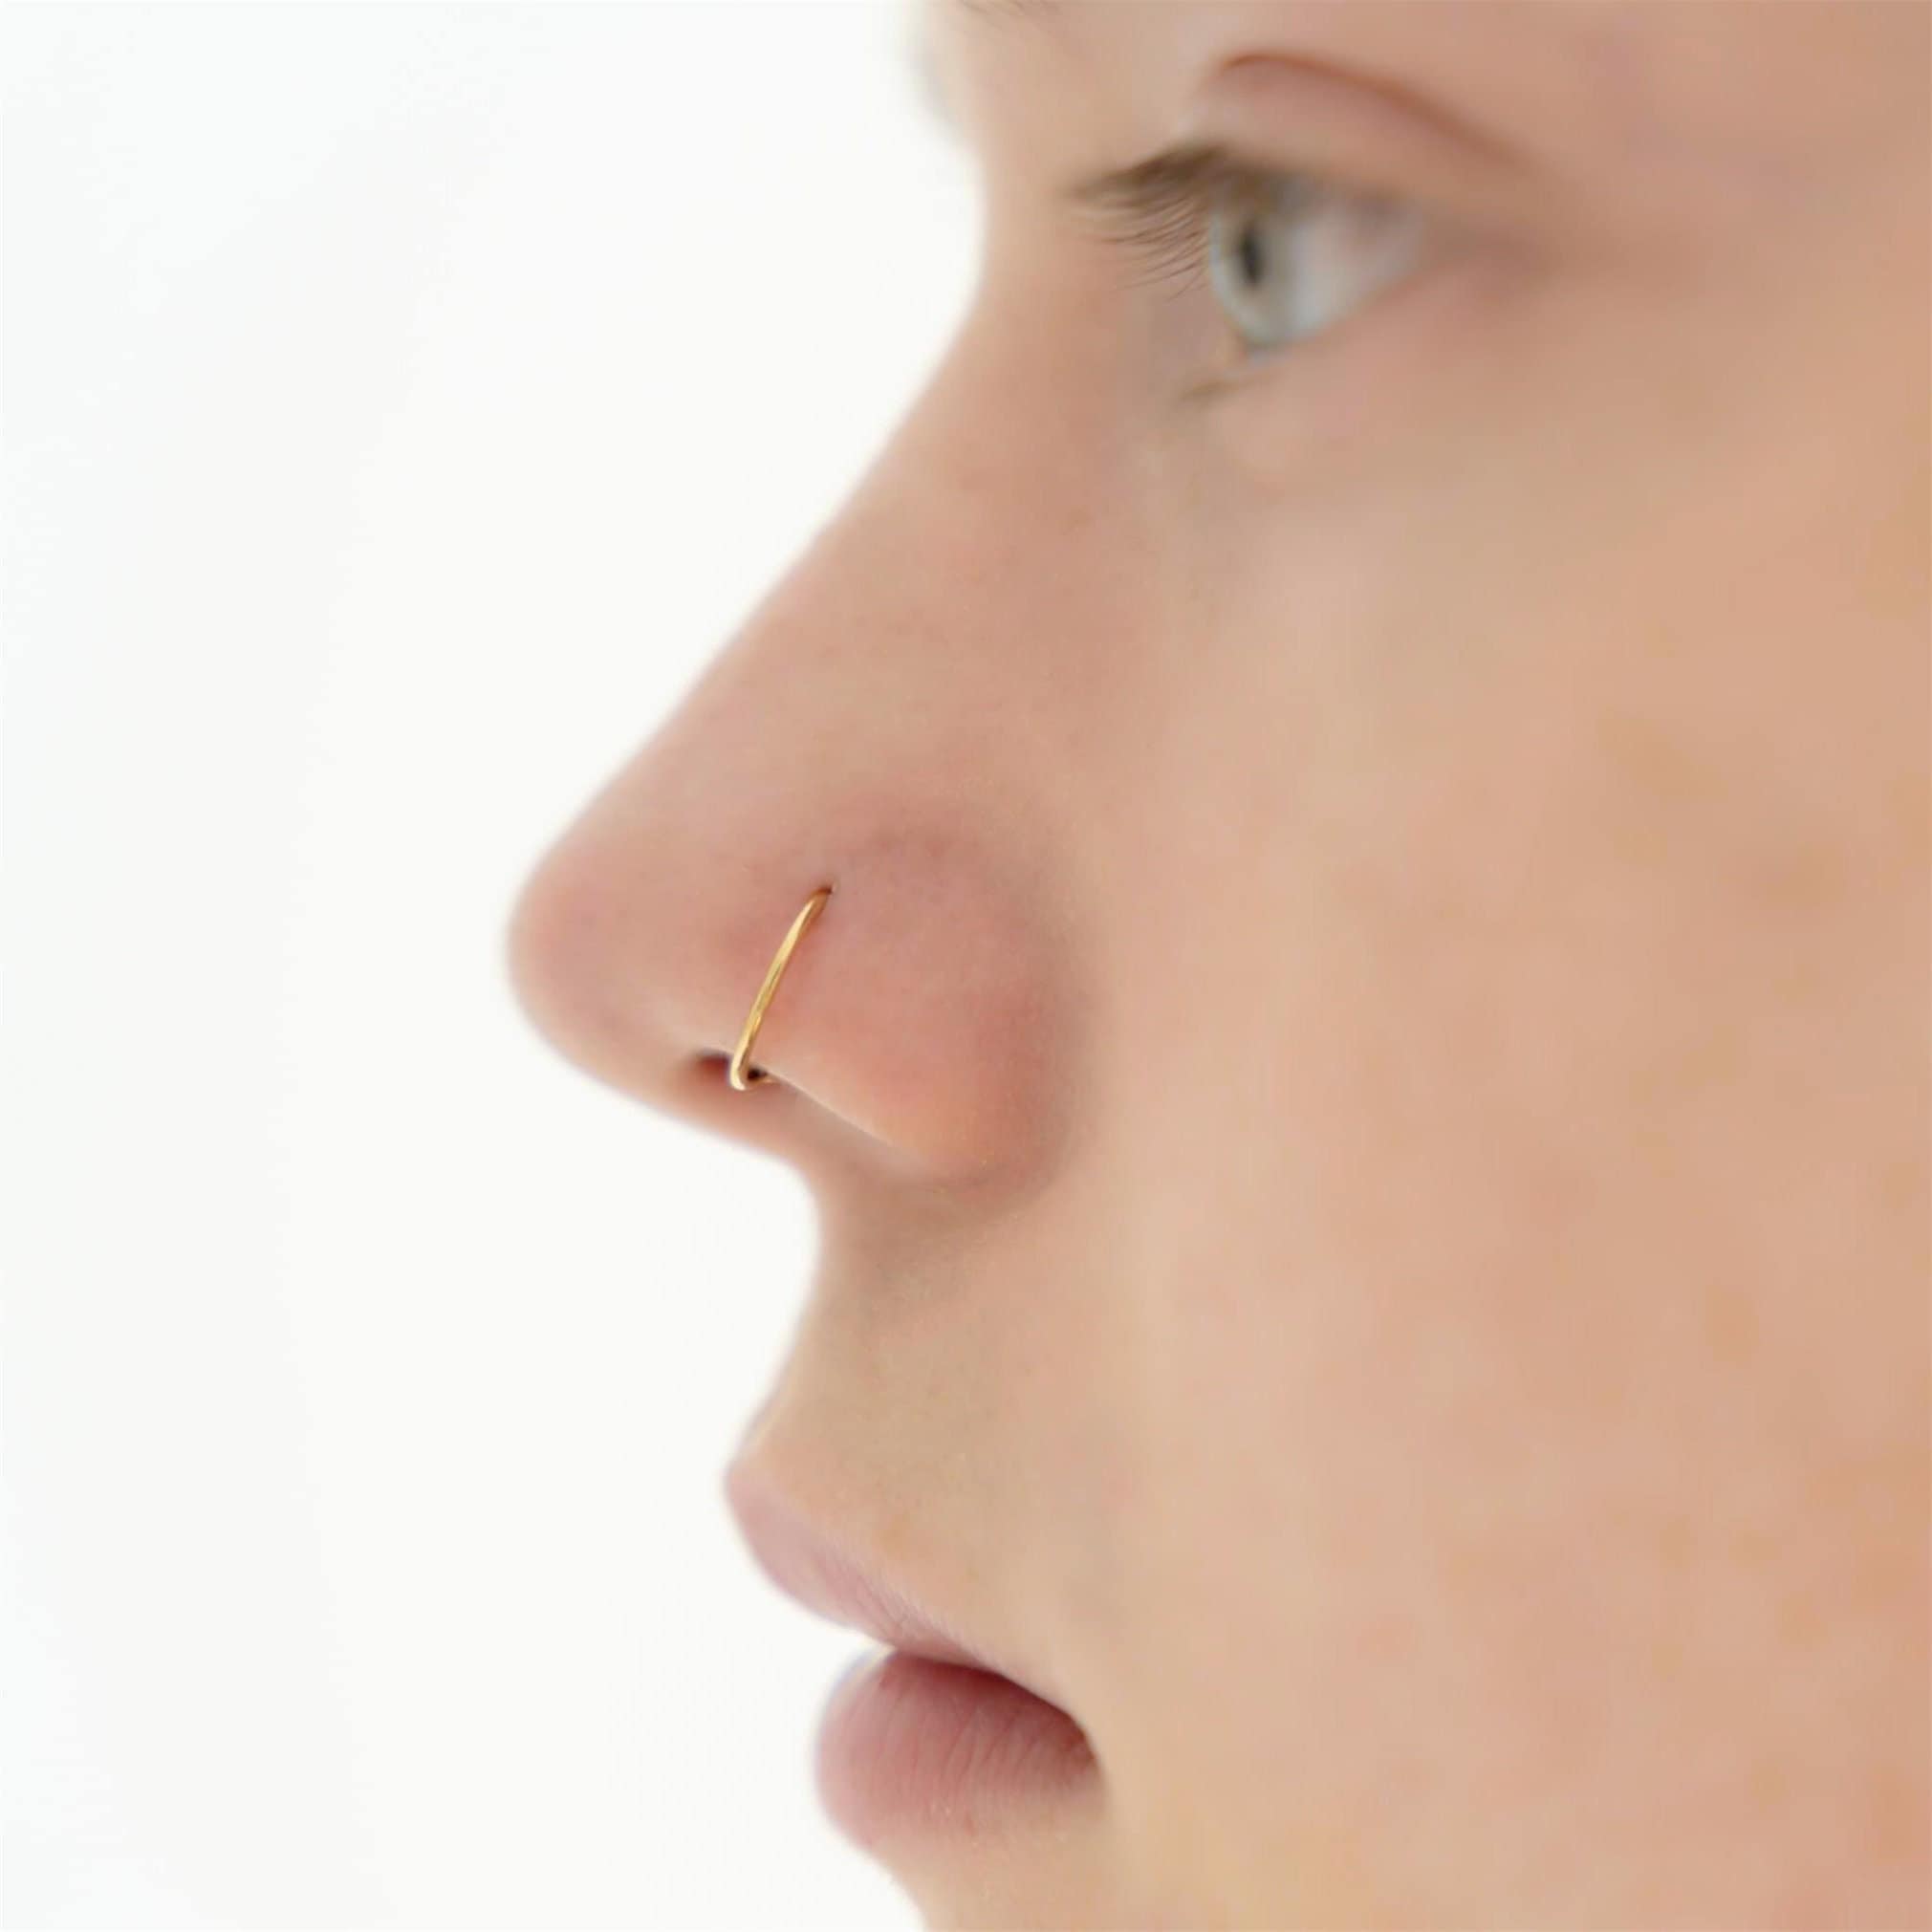 14k Gold-Filled, 5mm 24 Gauge - Left Side 24G Super Thin Tiny Double Nose Ring Hoop for Single Piercing Jewelry Women in 14k Gold Filled or Sterling Silver 